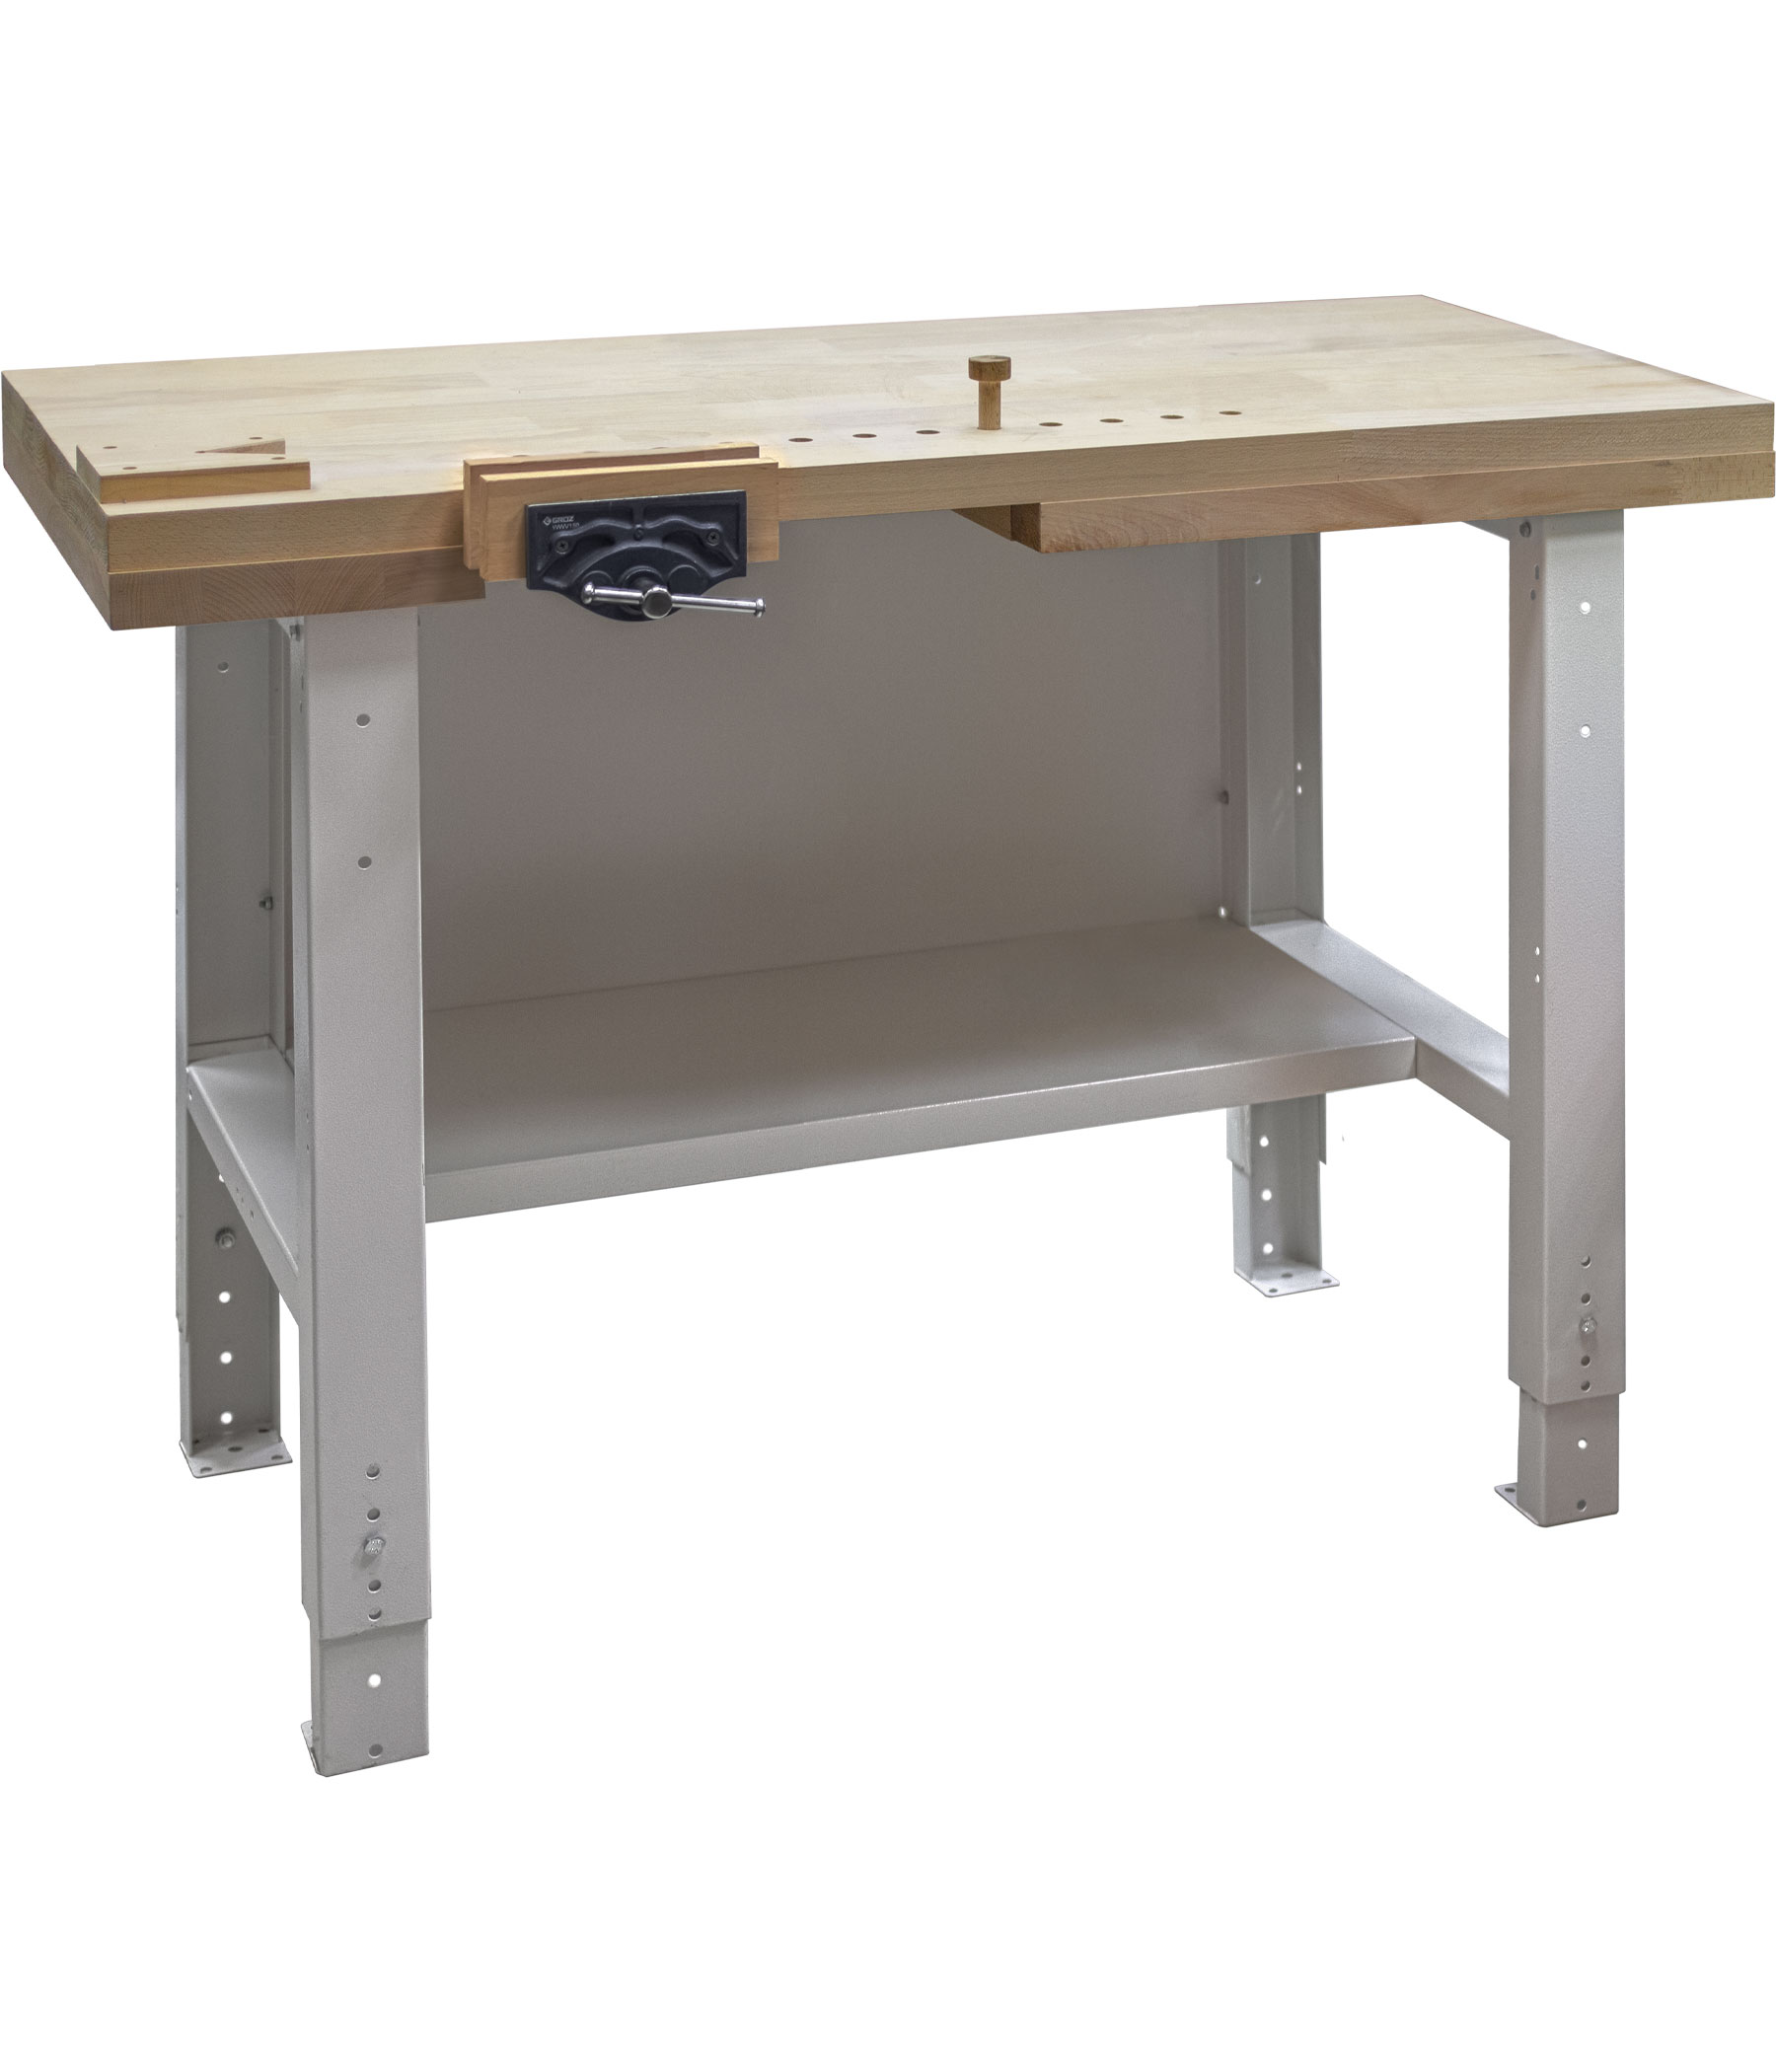 Joiner workbench VS 21 FV with front vice pack